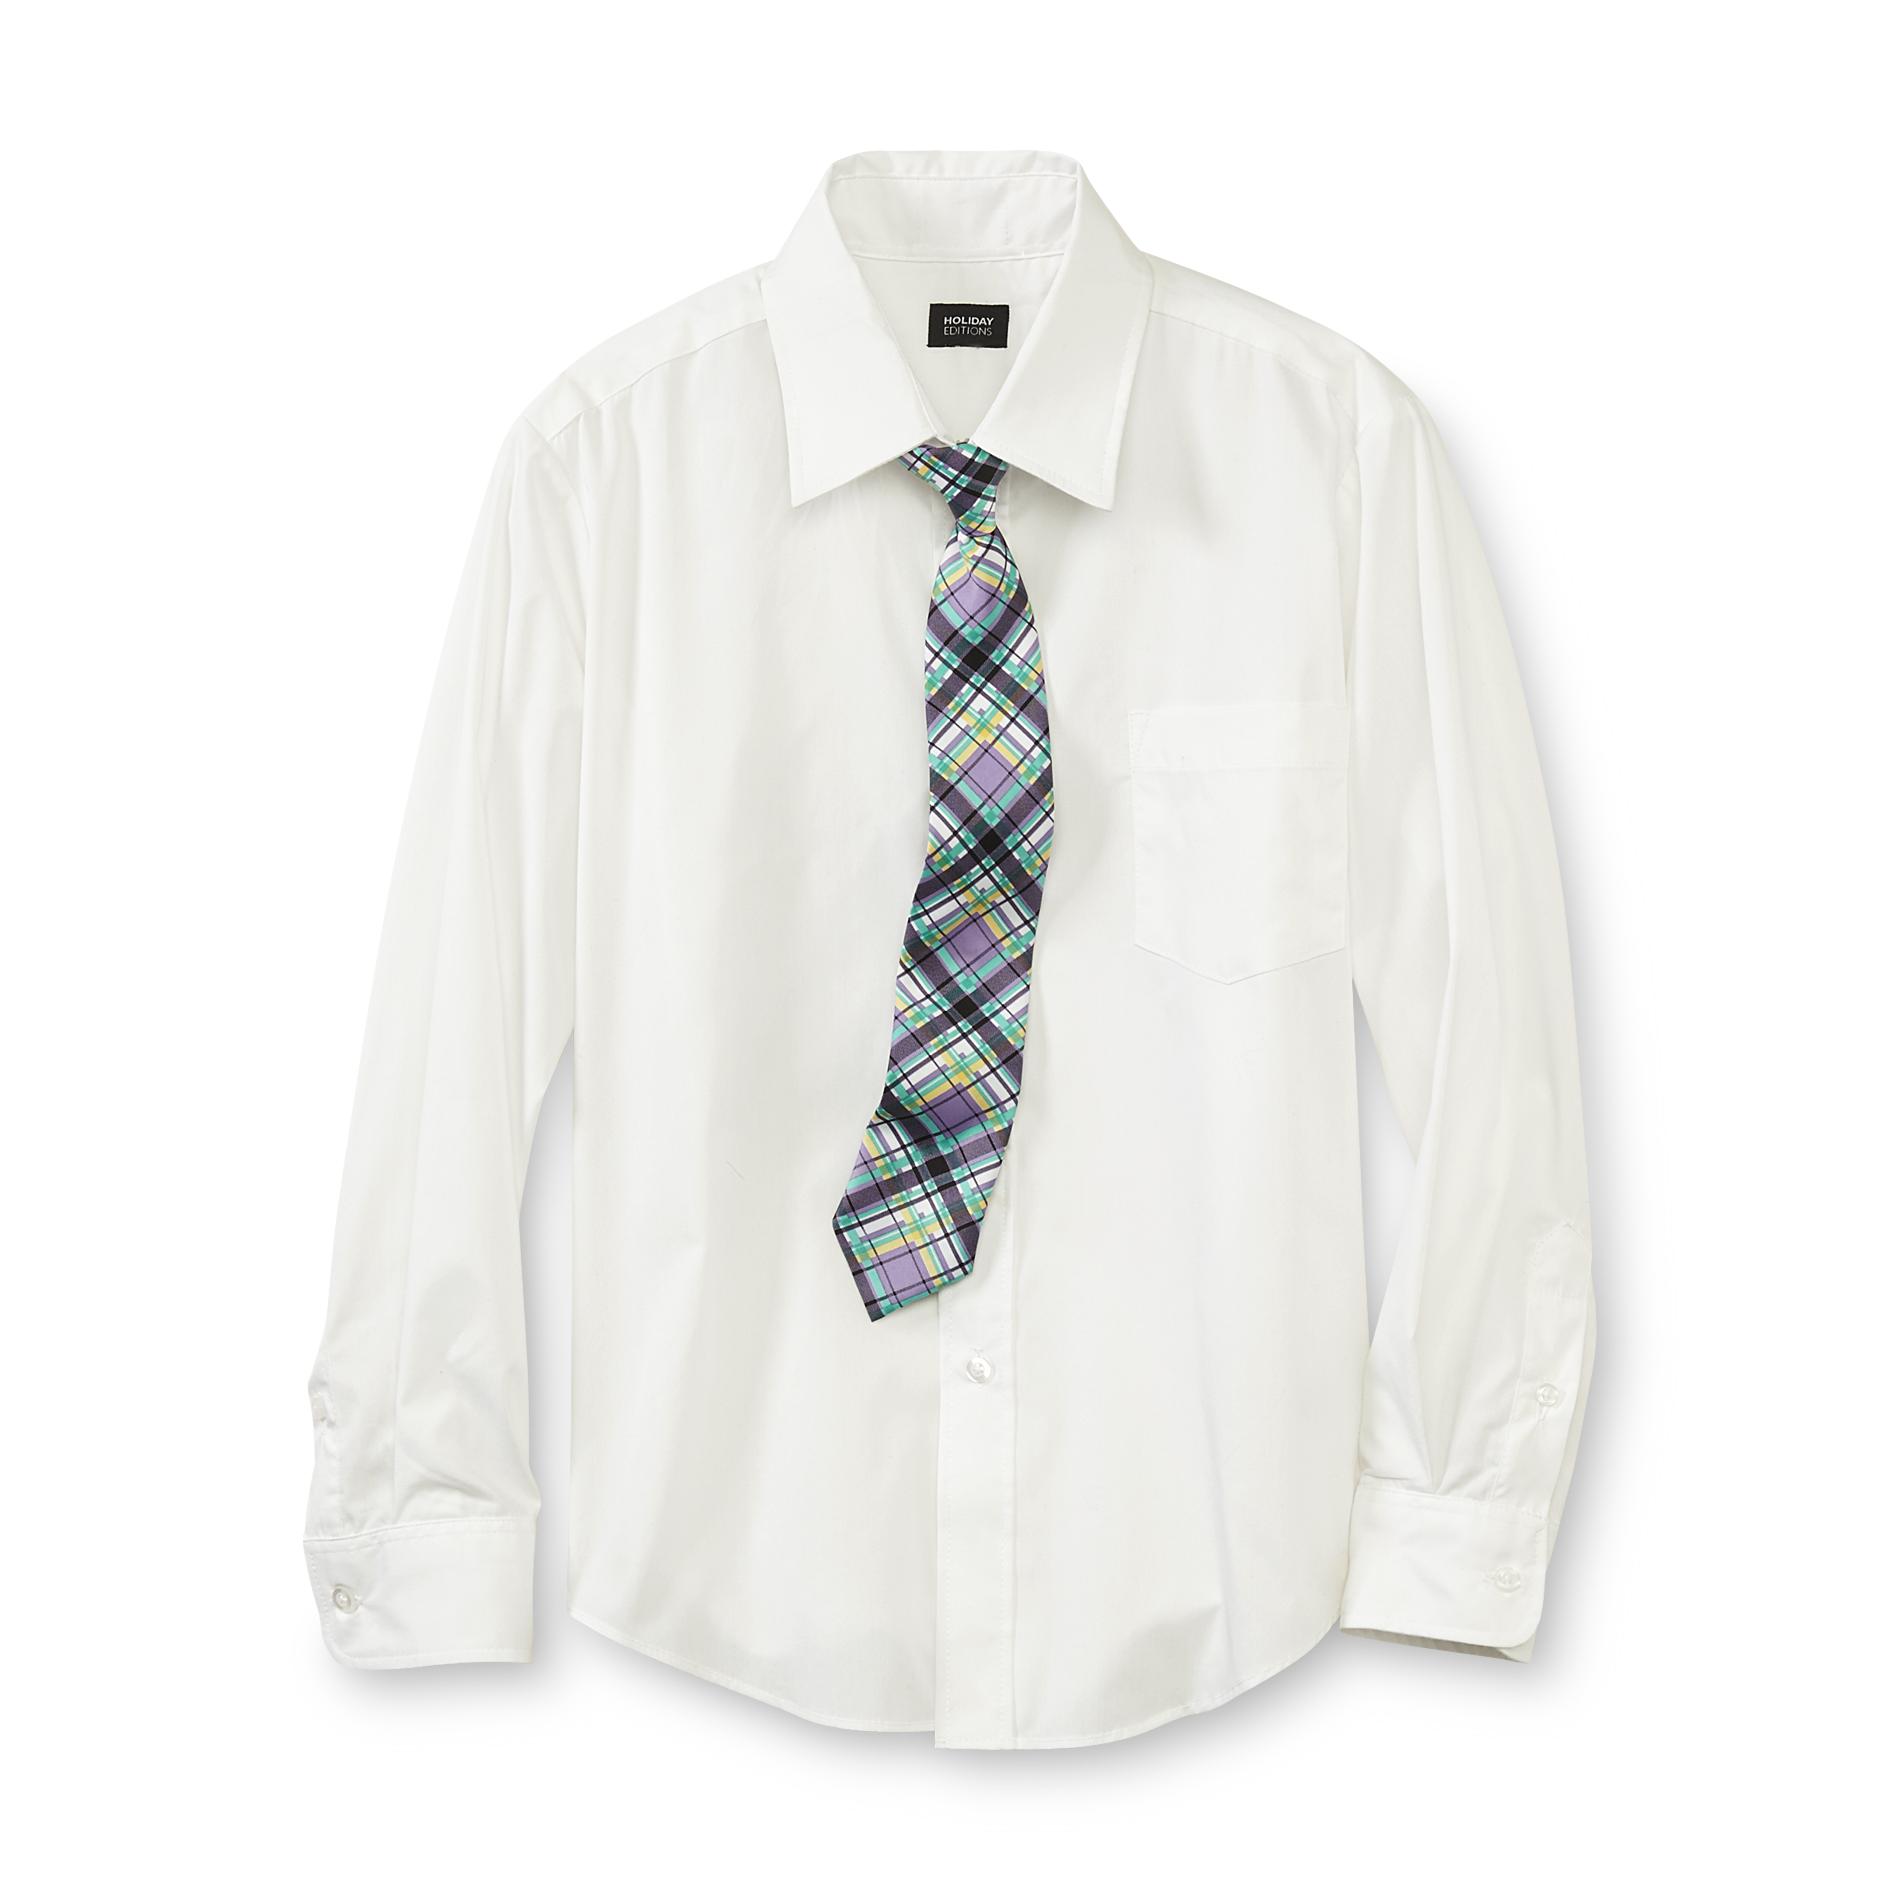 Holiday Editions Boy's Dress Shirt & Tie